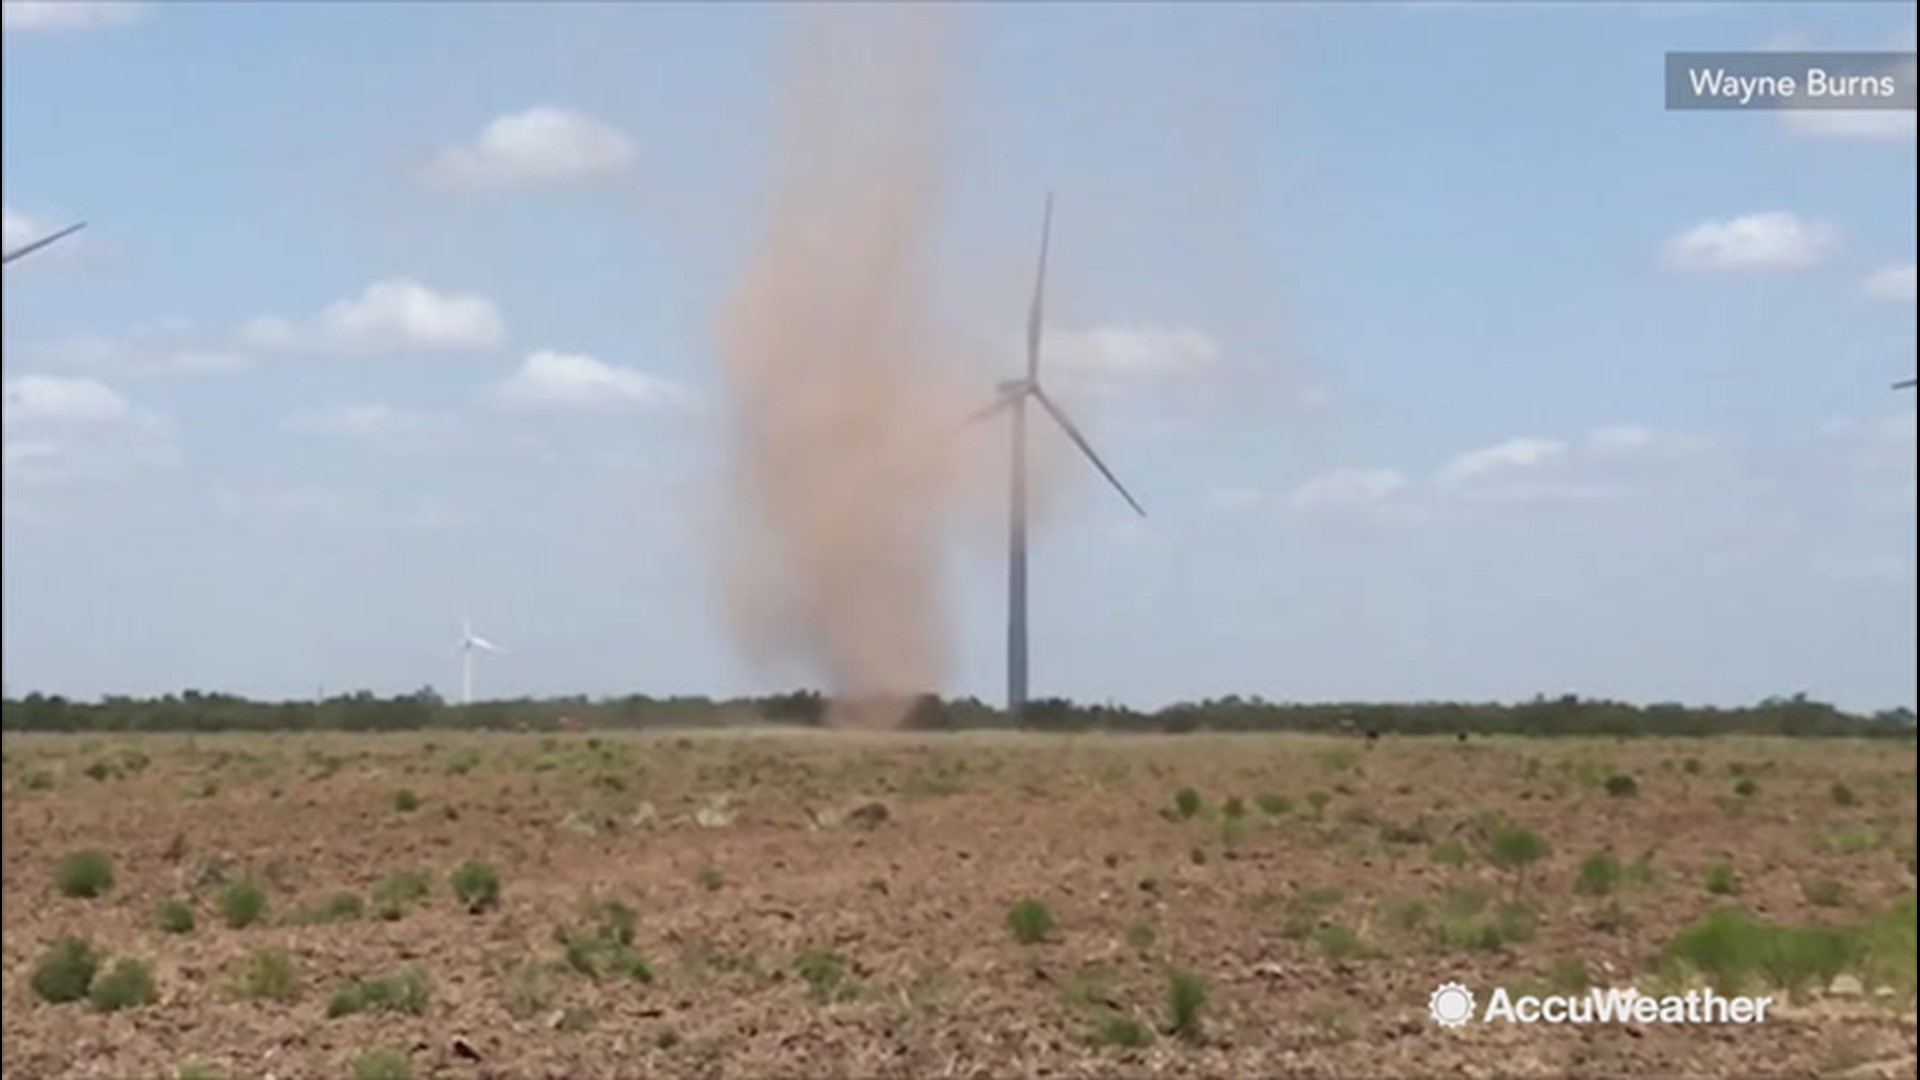 Watch as this massive dust devil spins in Sterling City, Texas, kicking up substantial amounts of dirt, on Aug. 21.